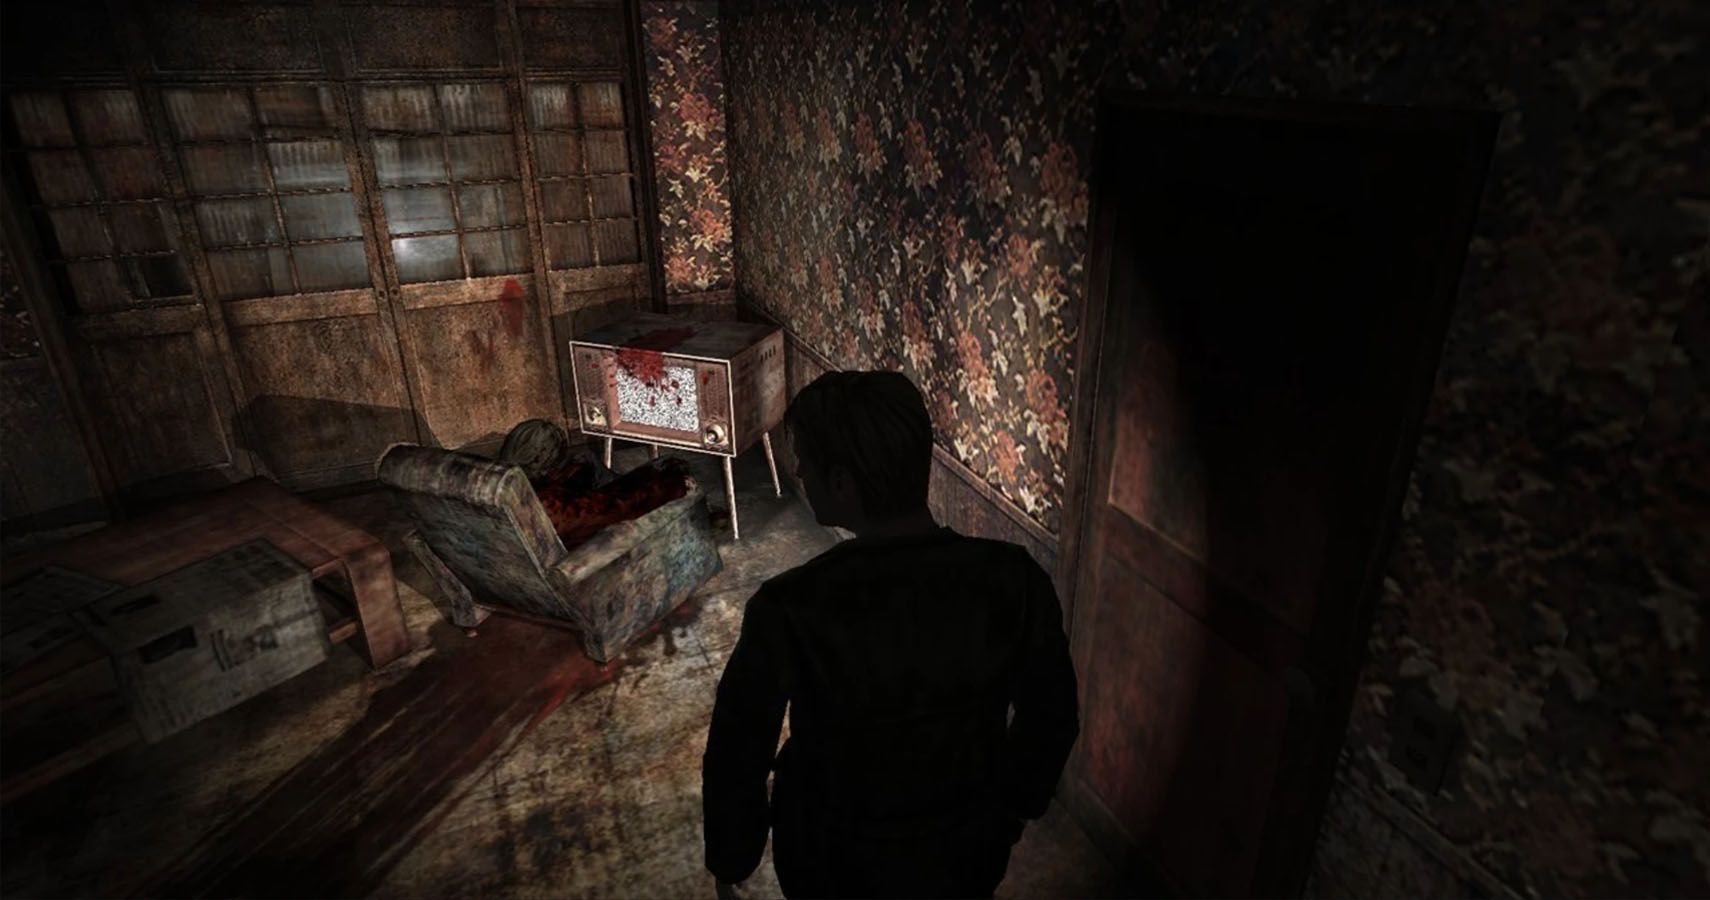 silent hill 2 for ps4